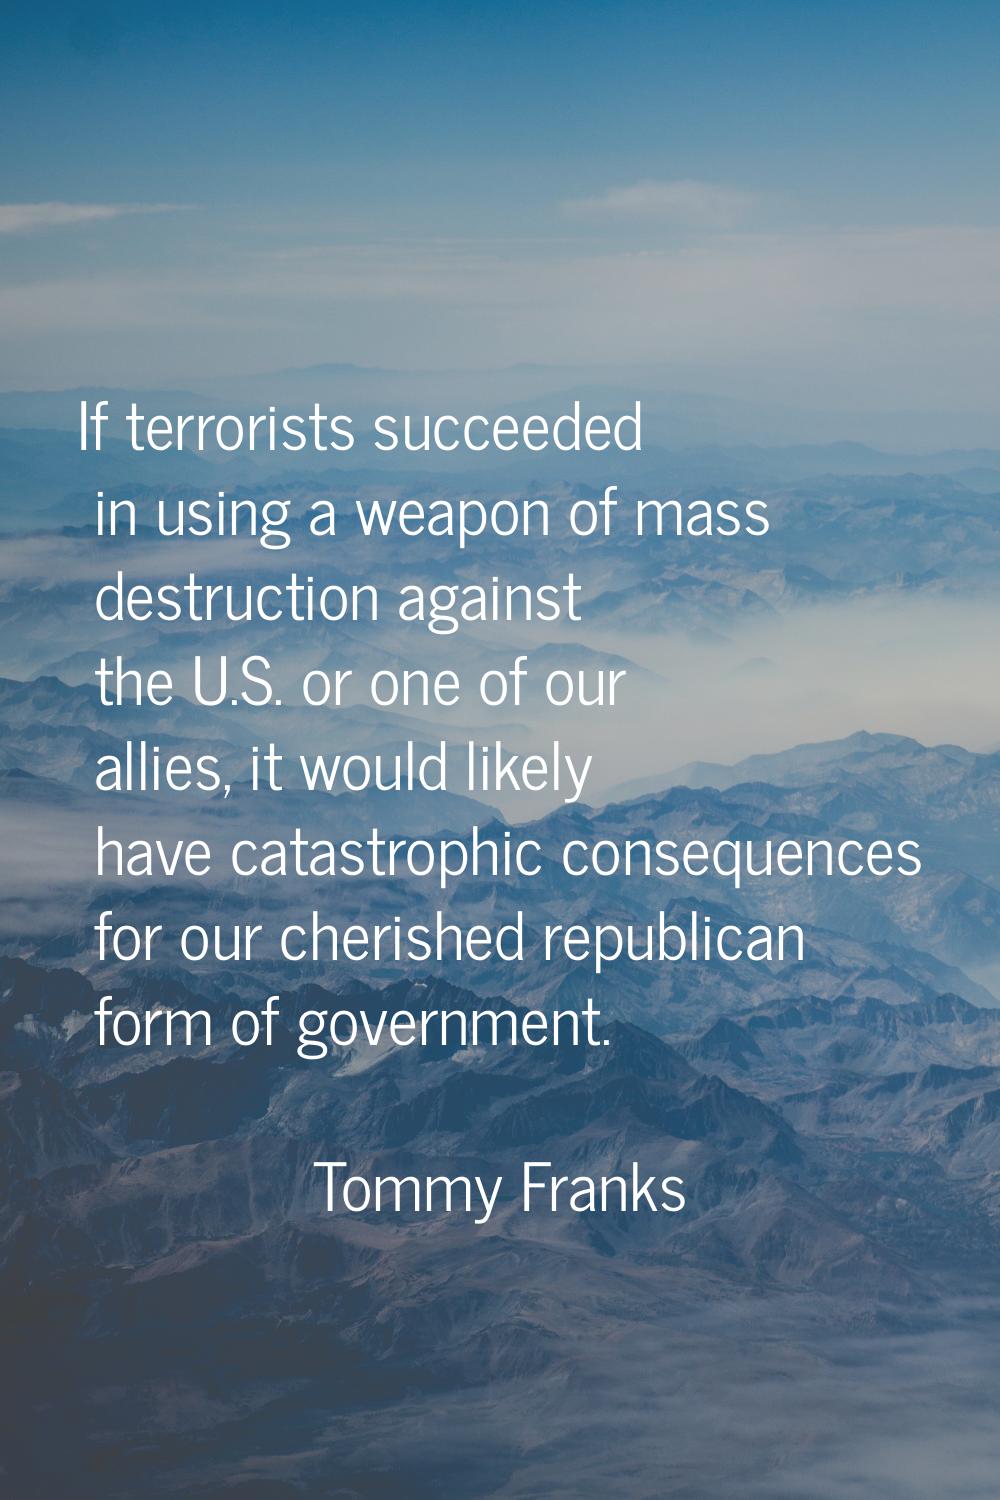 If terrorists succeeded in using a weapon of mass destruction against the U.S. or one of our allies